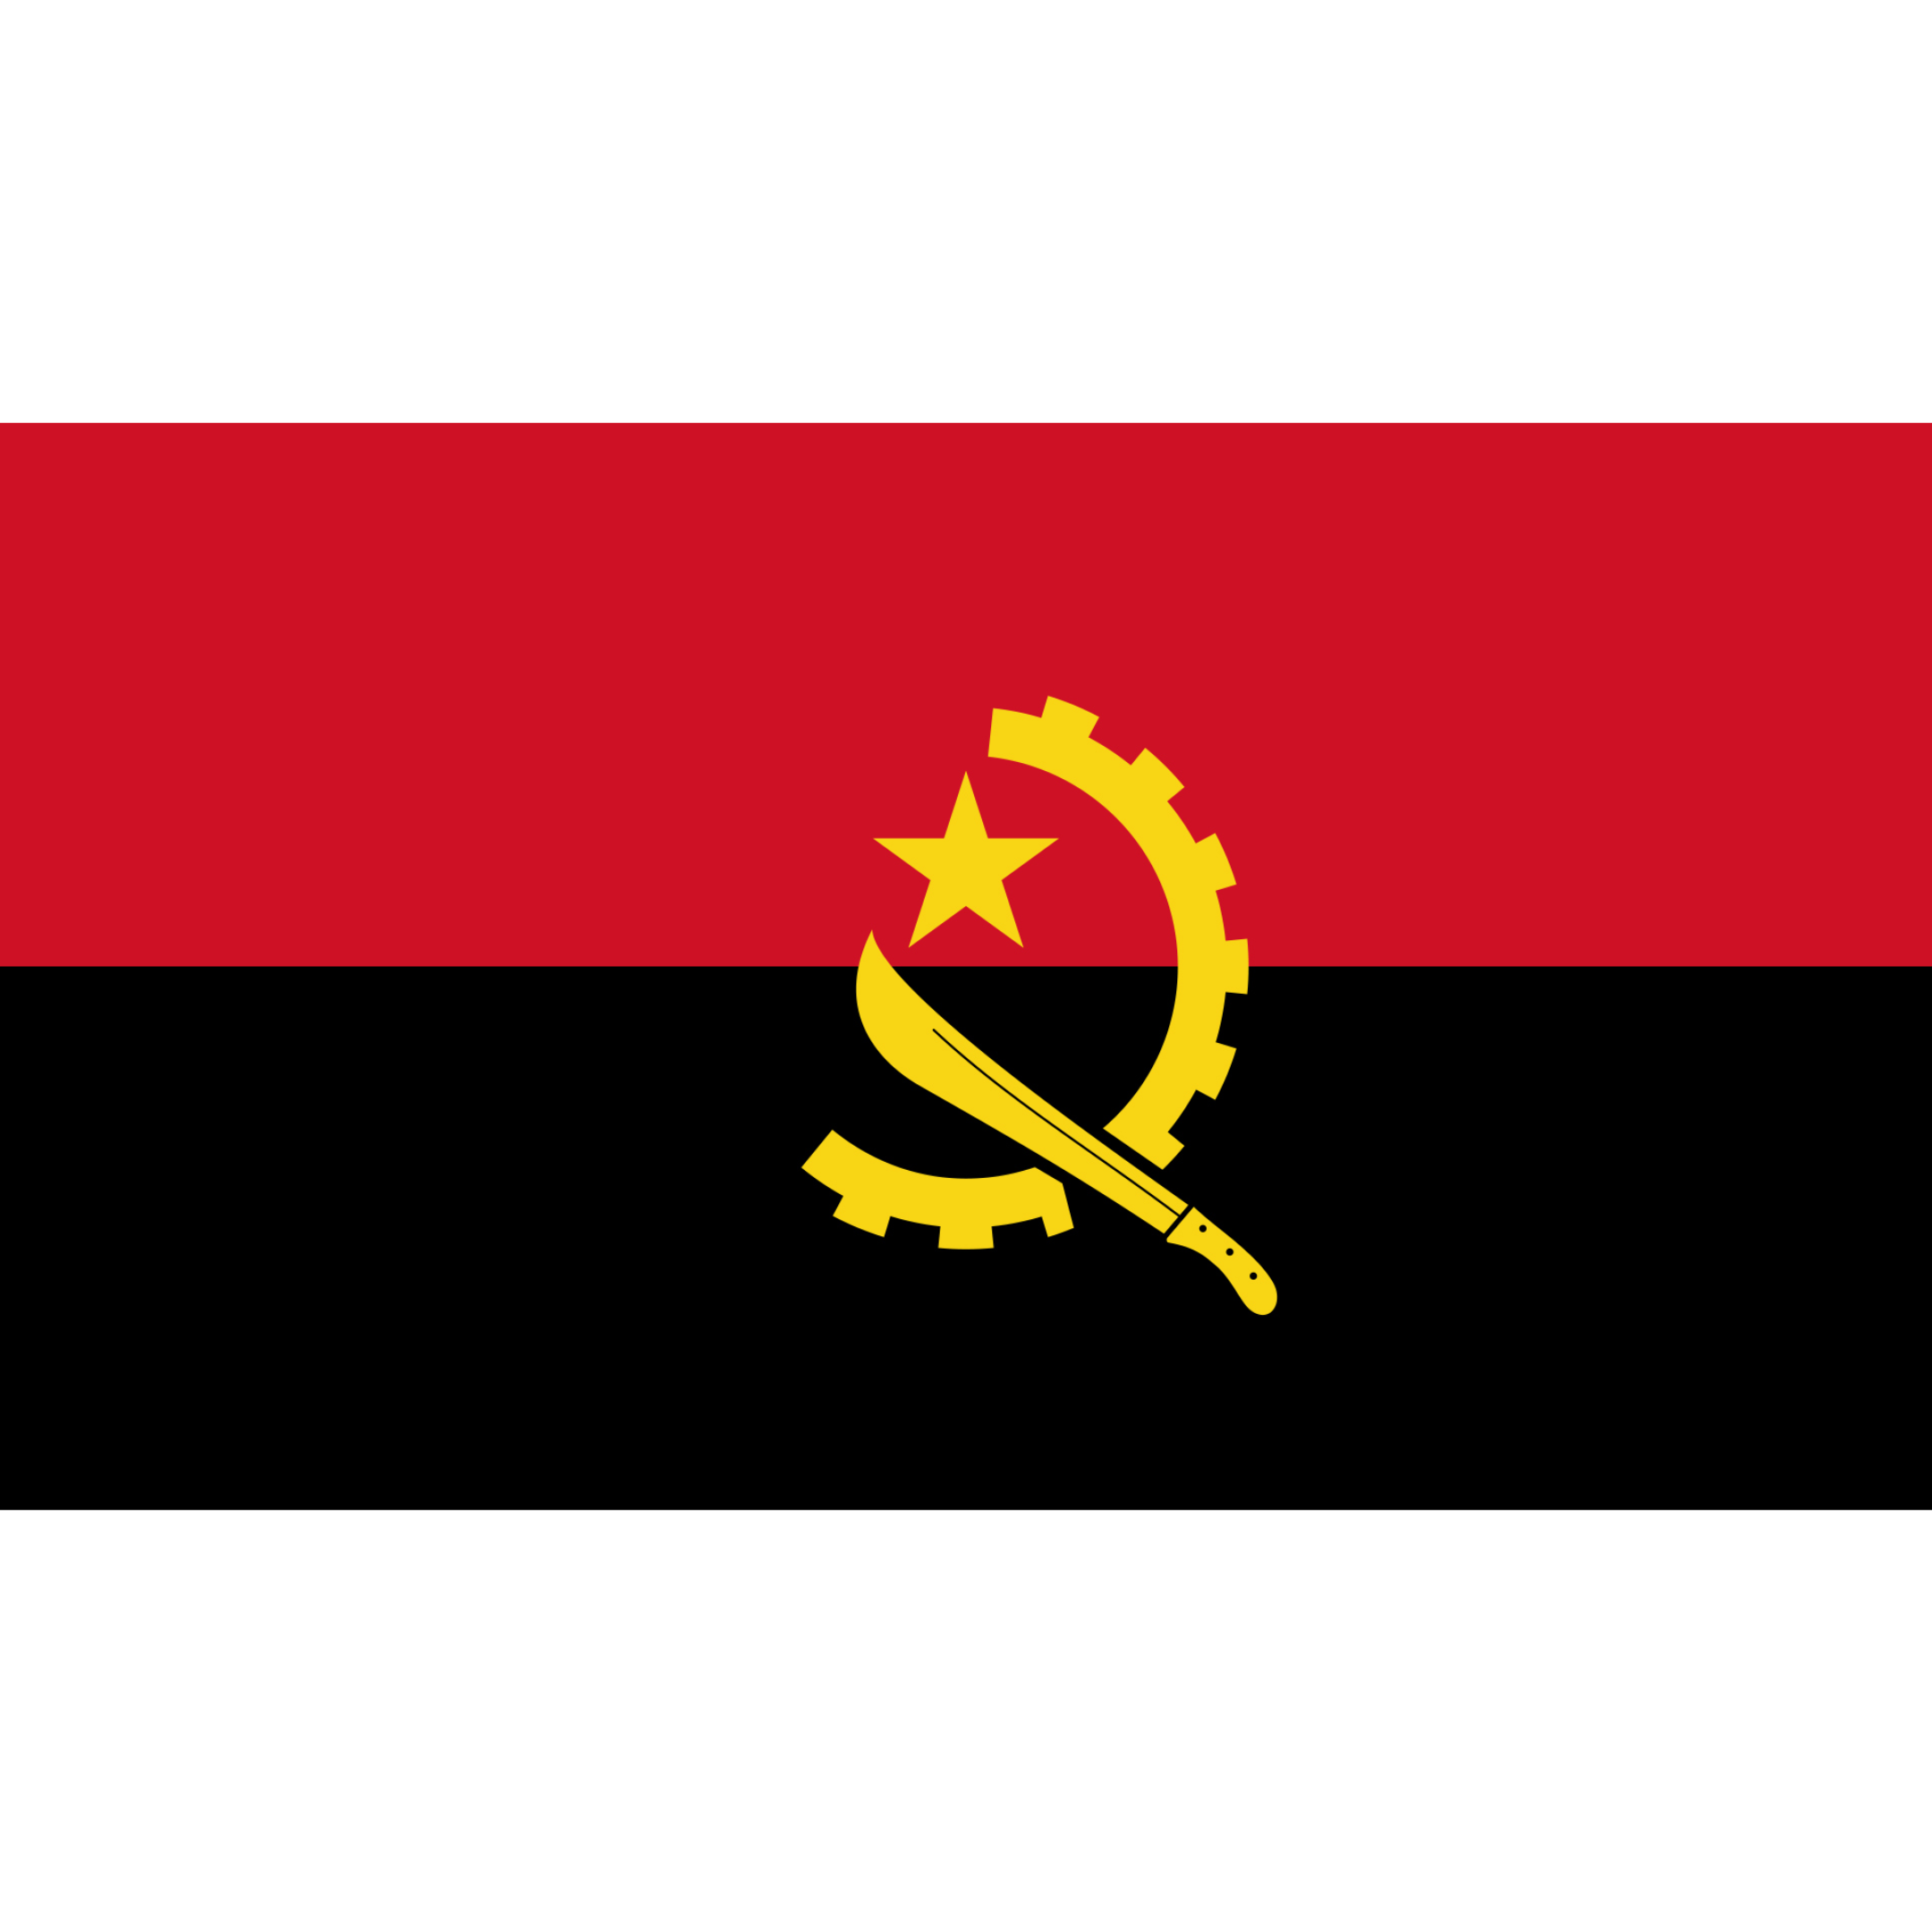 The flag of Angola is divided horizontally into 2 red and black bands, with a yellow star and emblem in the centre.